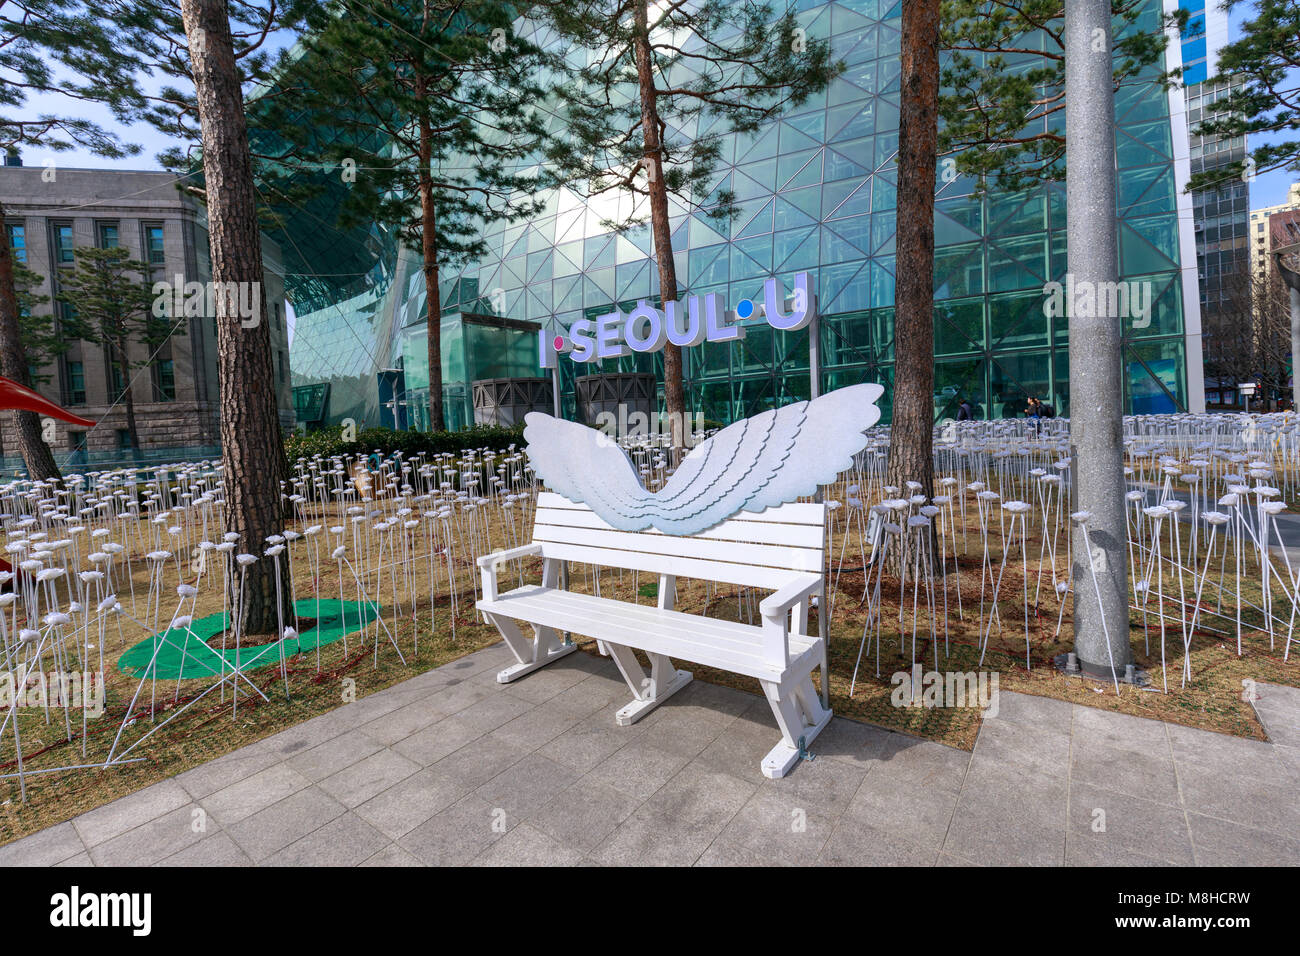 Seoul, South Korea - March 6, 2018 : Street bench with I SEOUL U, which is the new slogan for Seoul city in South Korea Stock Photo